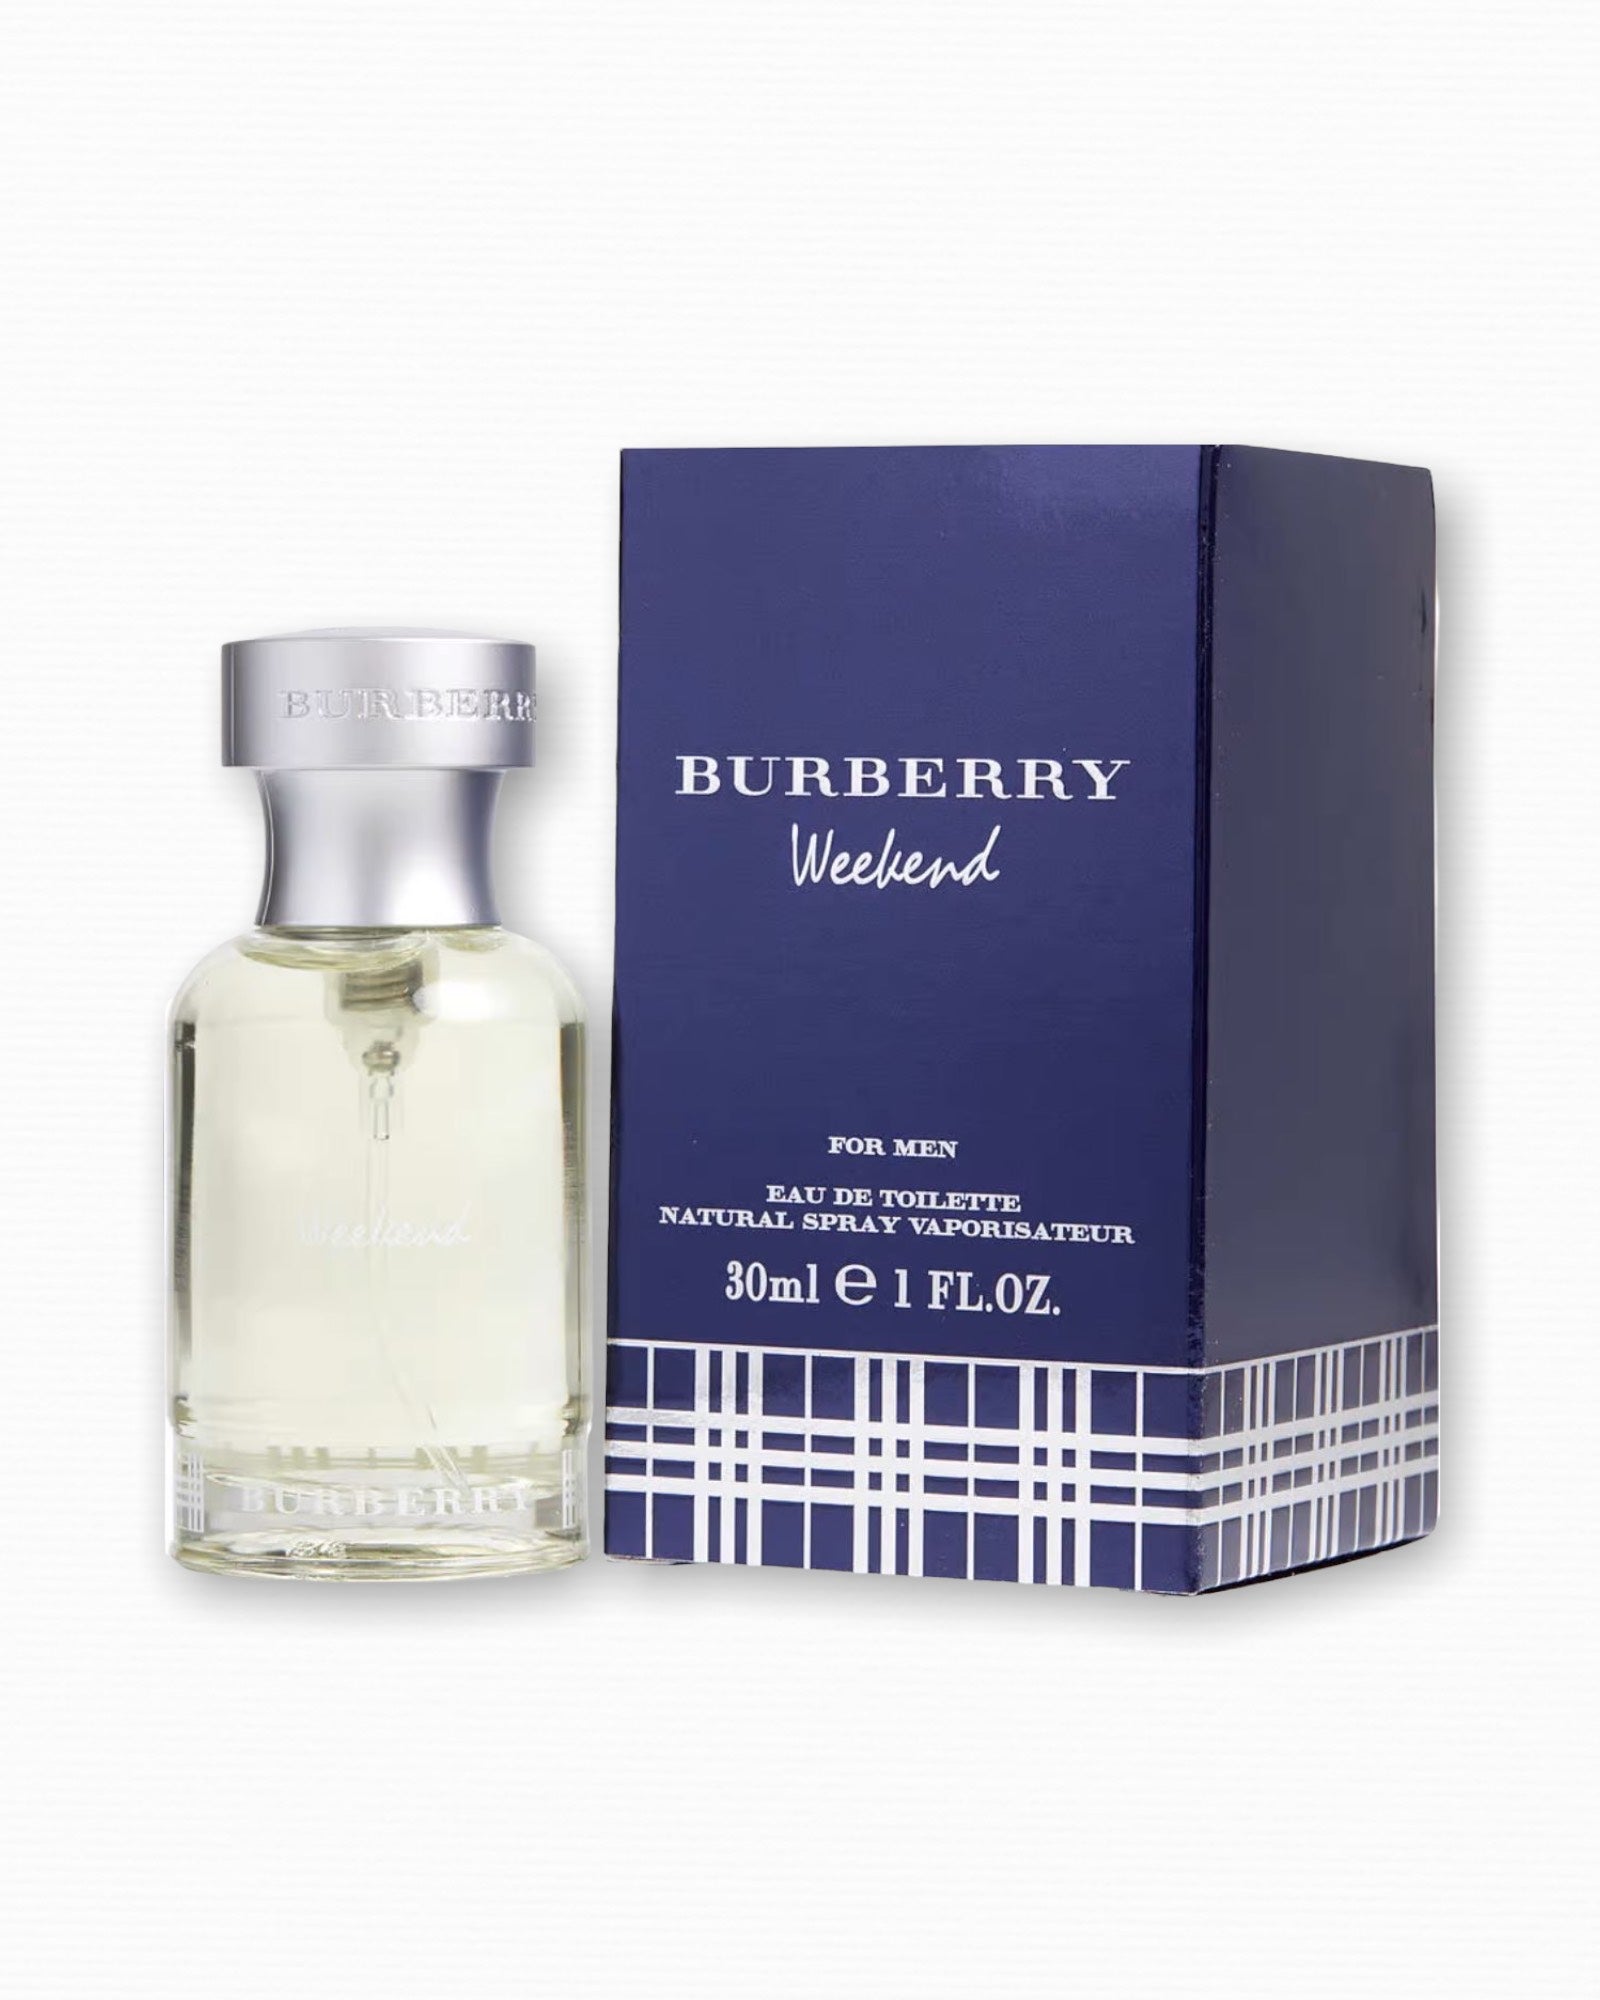 Burberry Weekend For Men EDT 1.0 oz